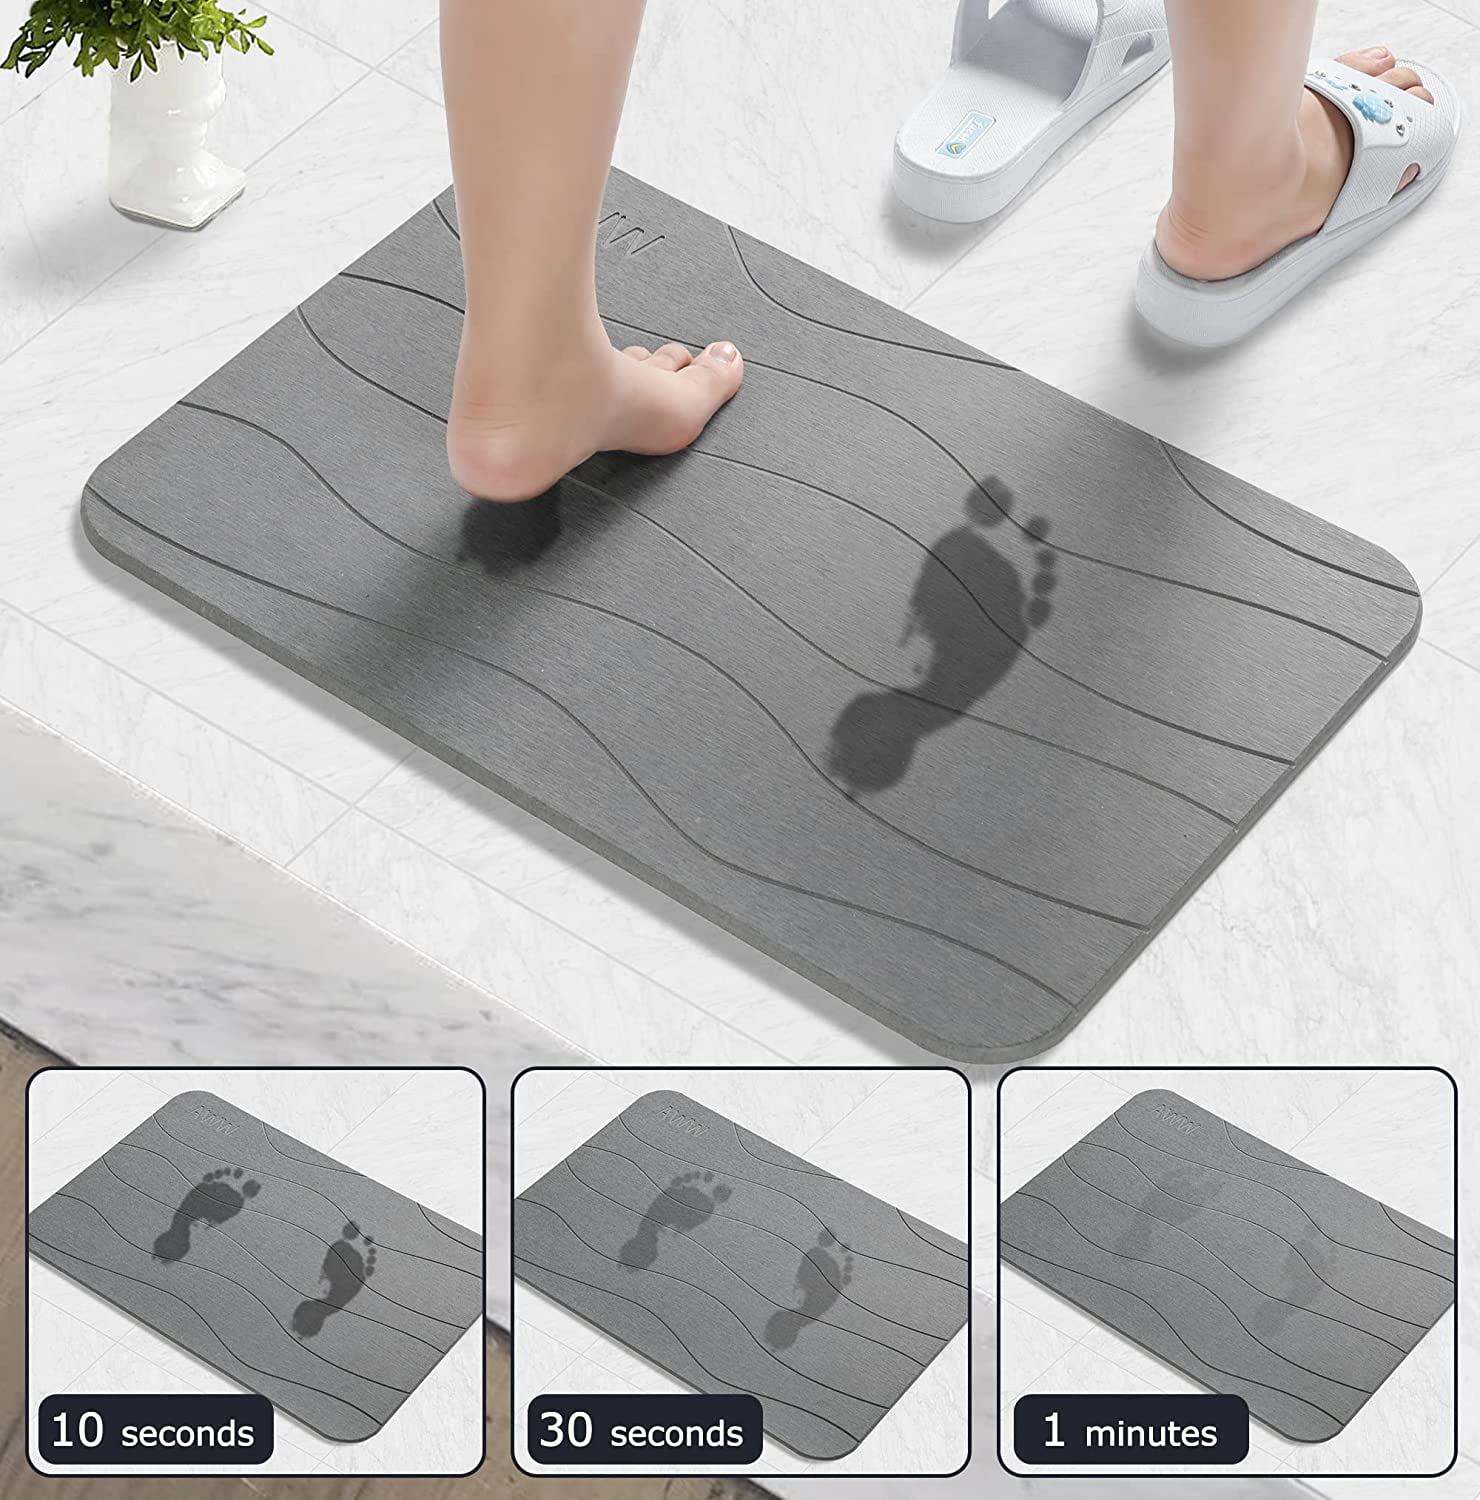 fast drying stone bath mat! #home #homefinds